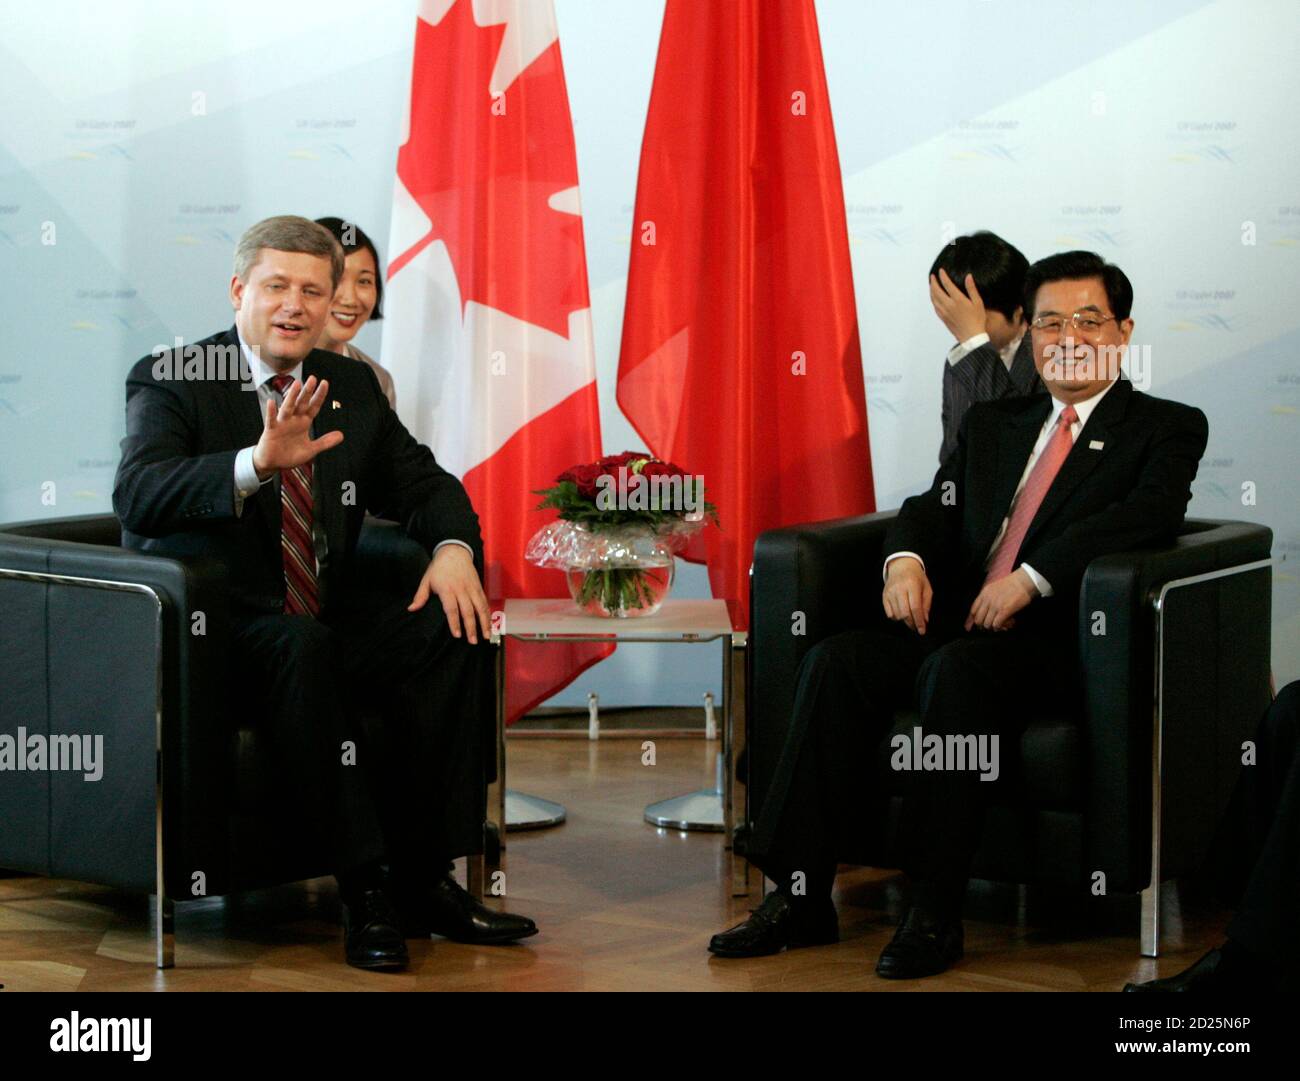 Canadian Prime Minister Stephen Harper (L) gestures at the beginning of his meeting with Chinese President Hu Jintao at the G8 Summit in Heiligendamm June 8, 2007. World powers on Friday pledged $60 billion to fight AIDS and other diseases ravaging Africa but development campaigners complained the Group of Eight had offered little fresh cash for the poor.        REUTERS/Chris Wattie   (GERMANY) Stock Photo